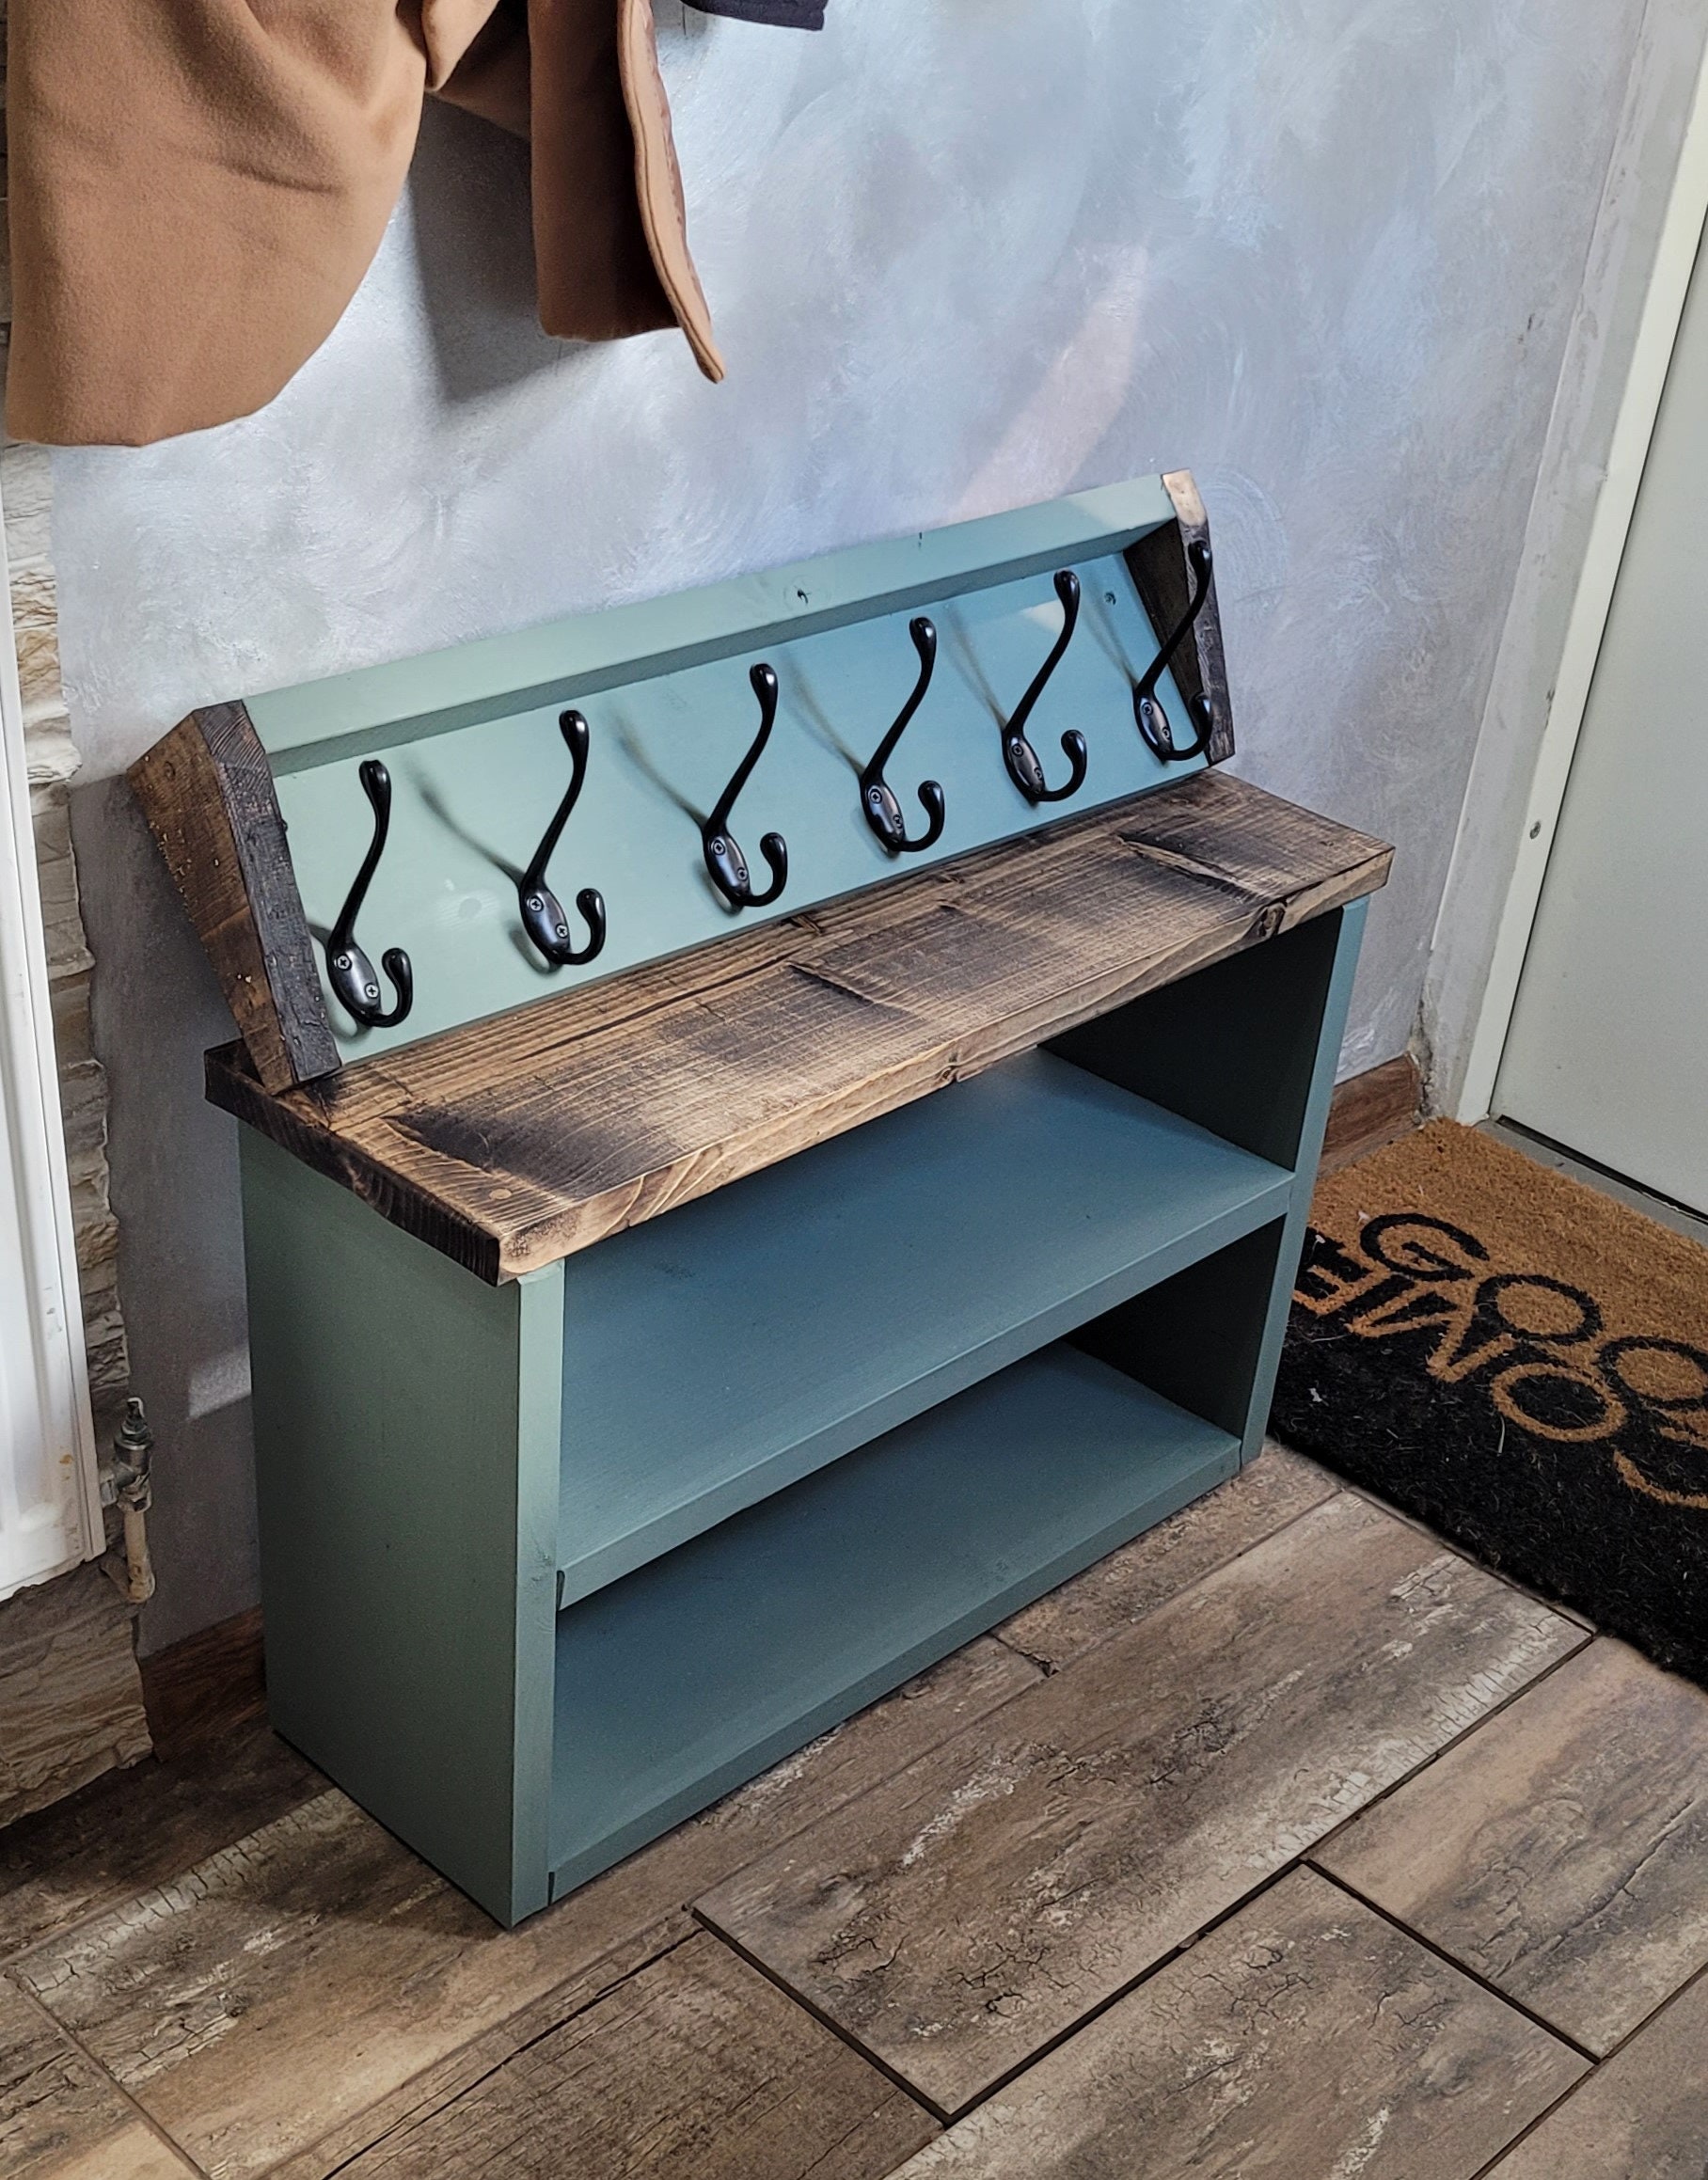 Rustic Handmade Crate Shoe Rack and Bench. Easy to Fix Together, No  Drilling. Excellent Quality Sturdy Shoe Storage. Dark Brown. 